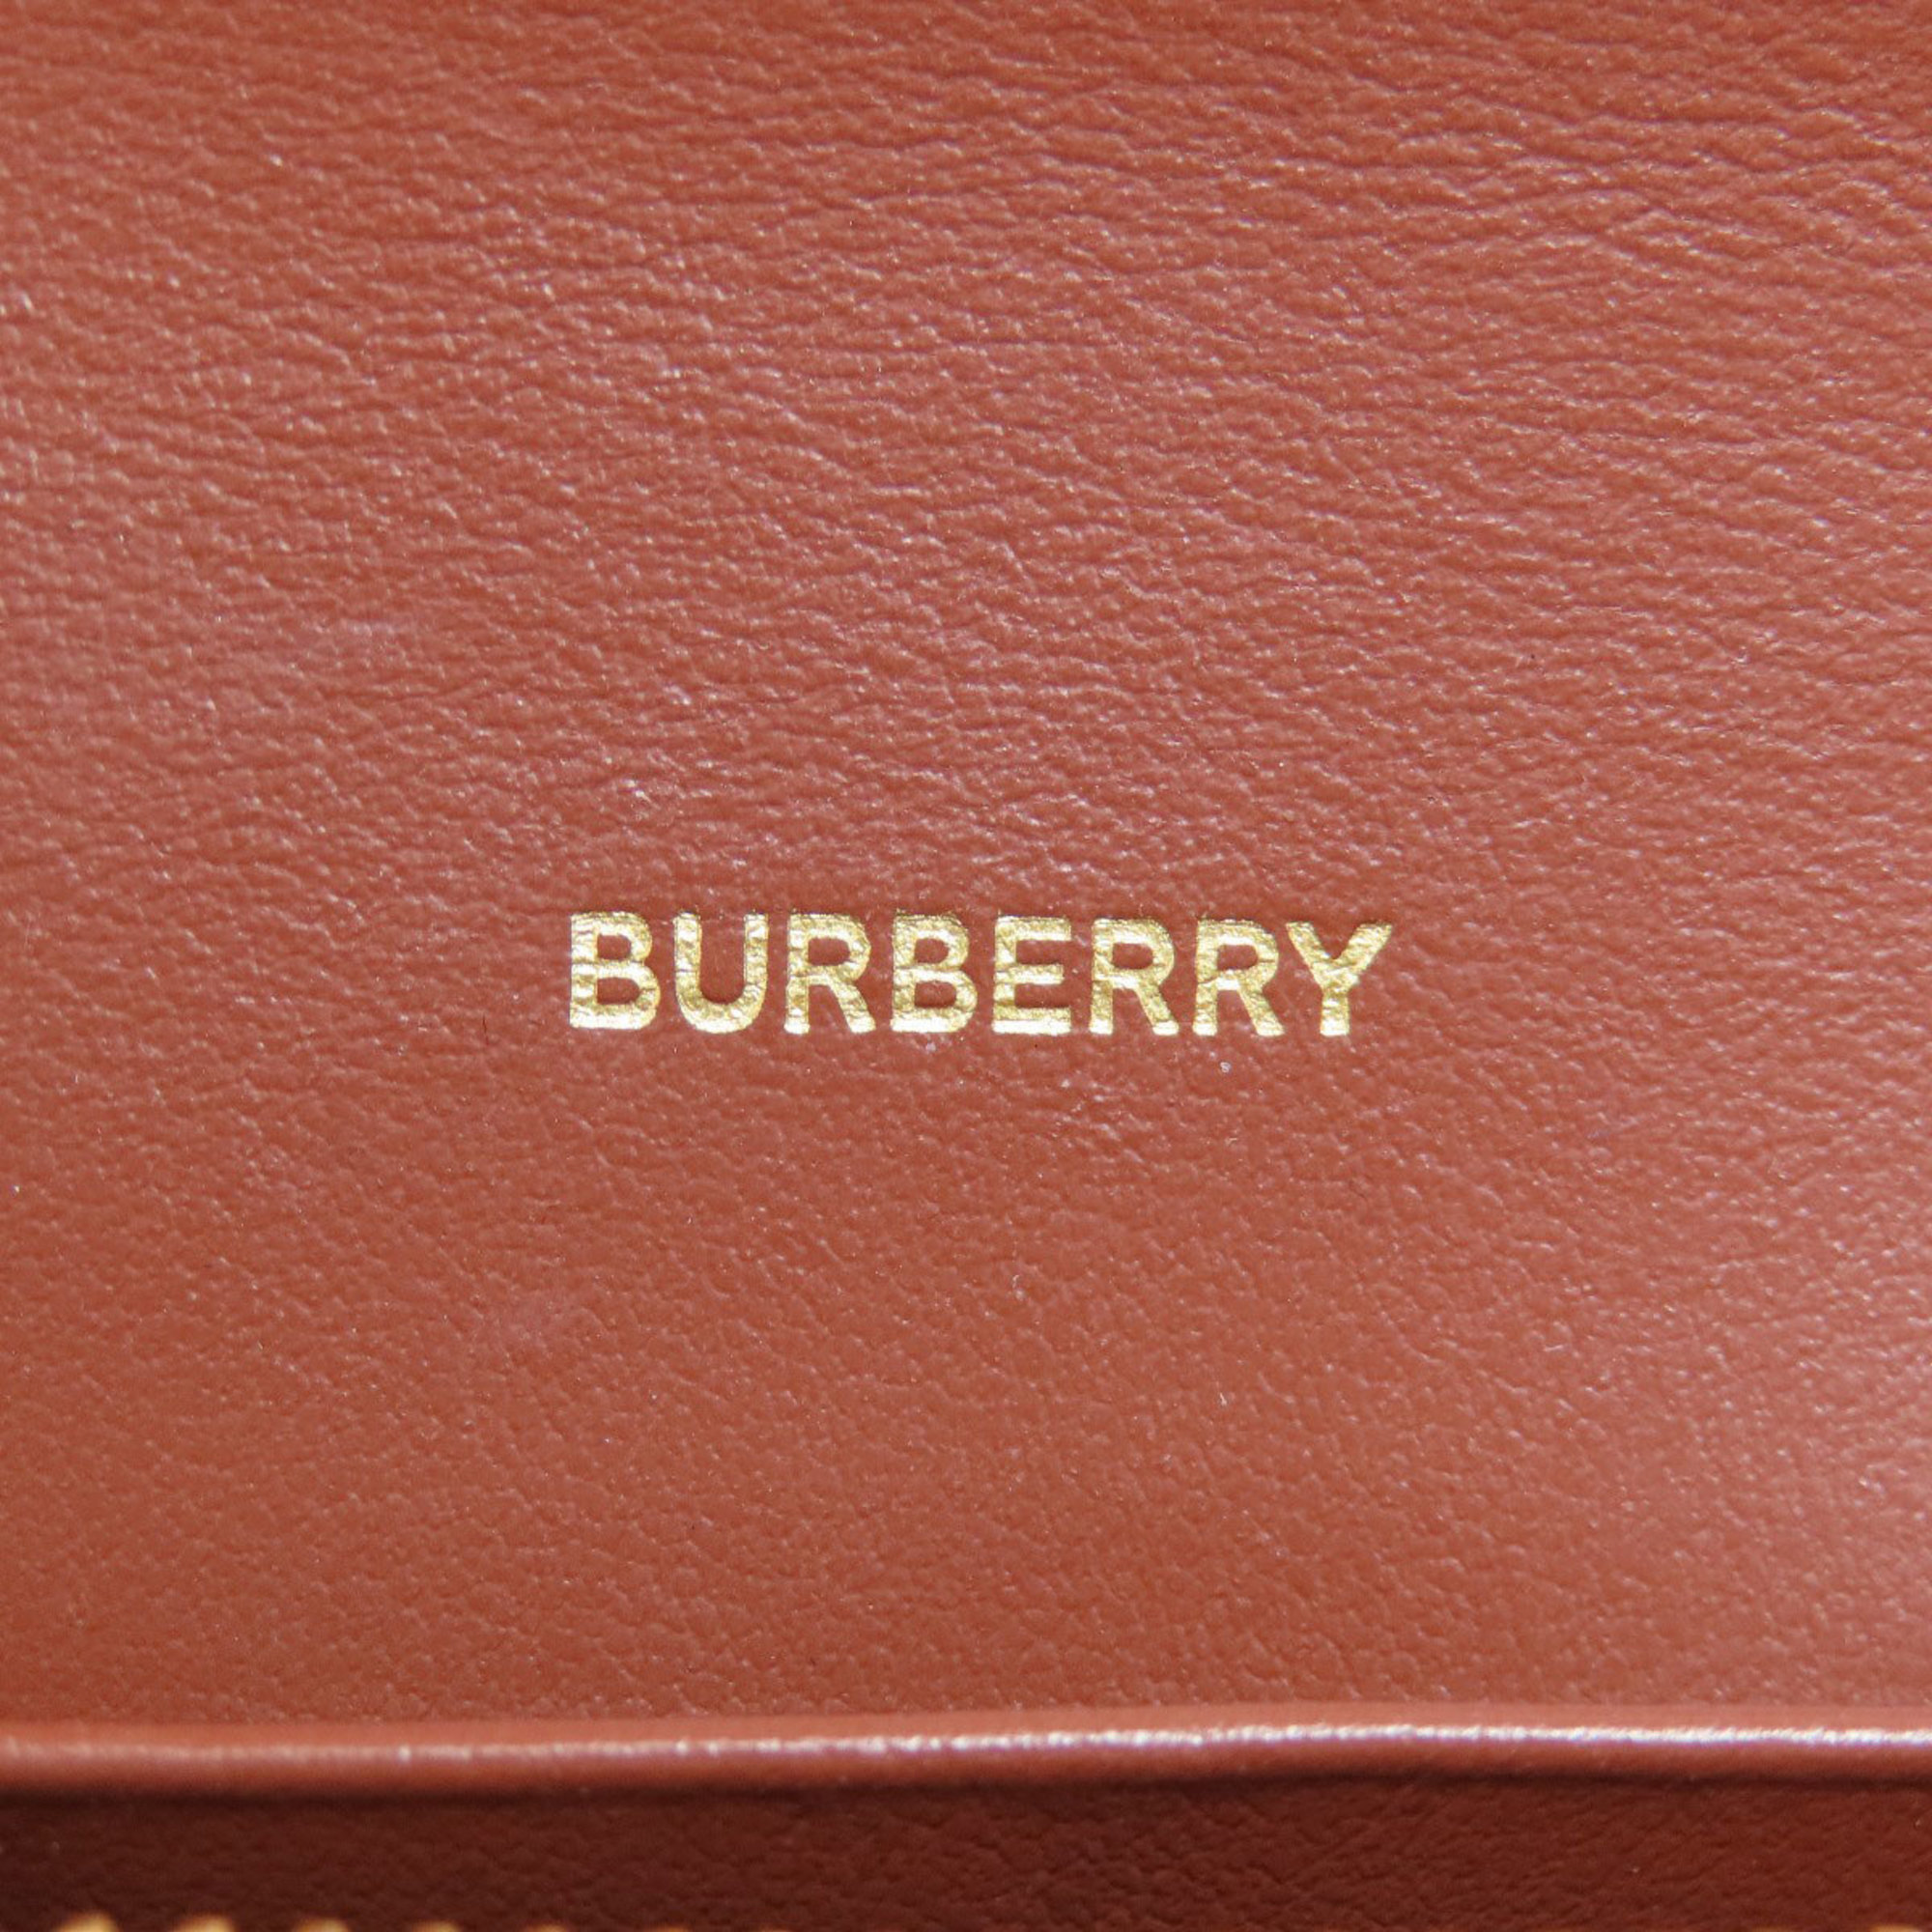 Burberry Striped Long Wallet PVC/Leather Women's BURBERRY